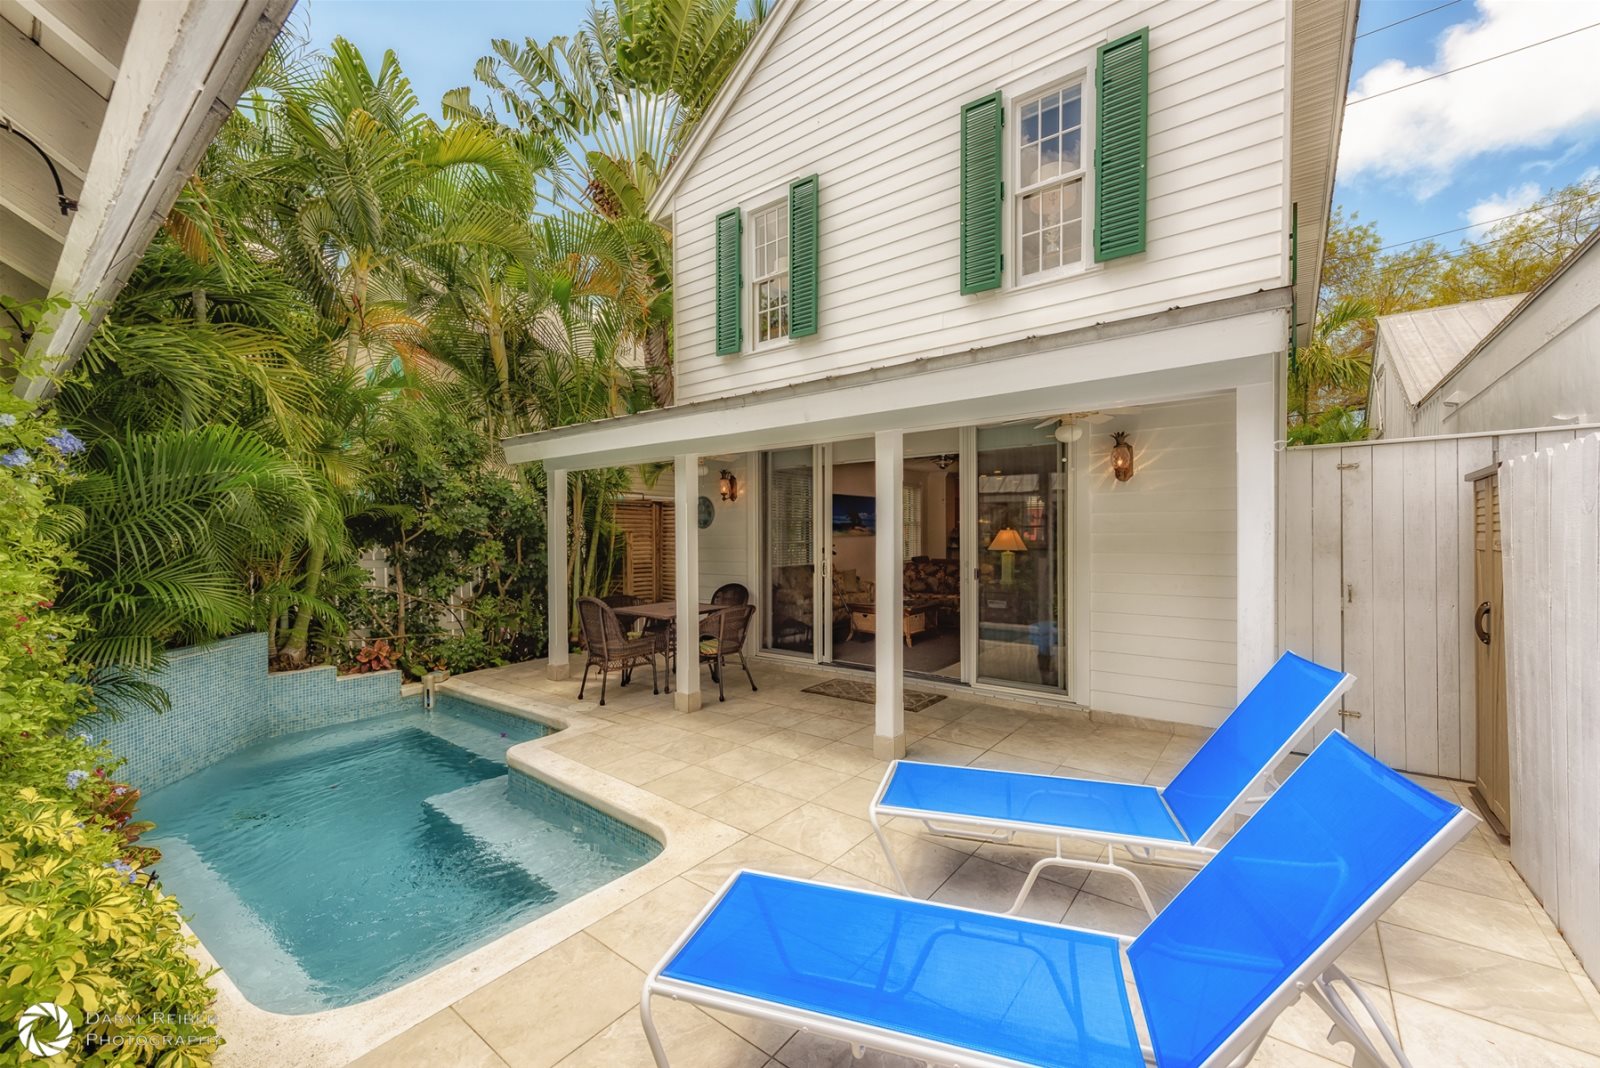 Monthly Key West Vacation Rental Off Duval St.